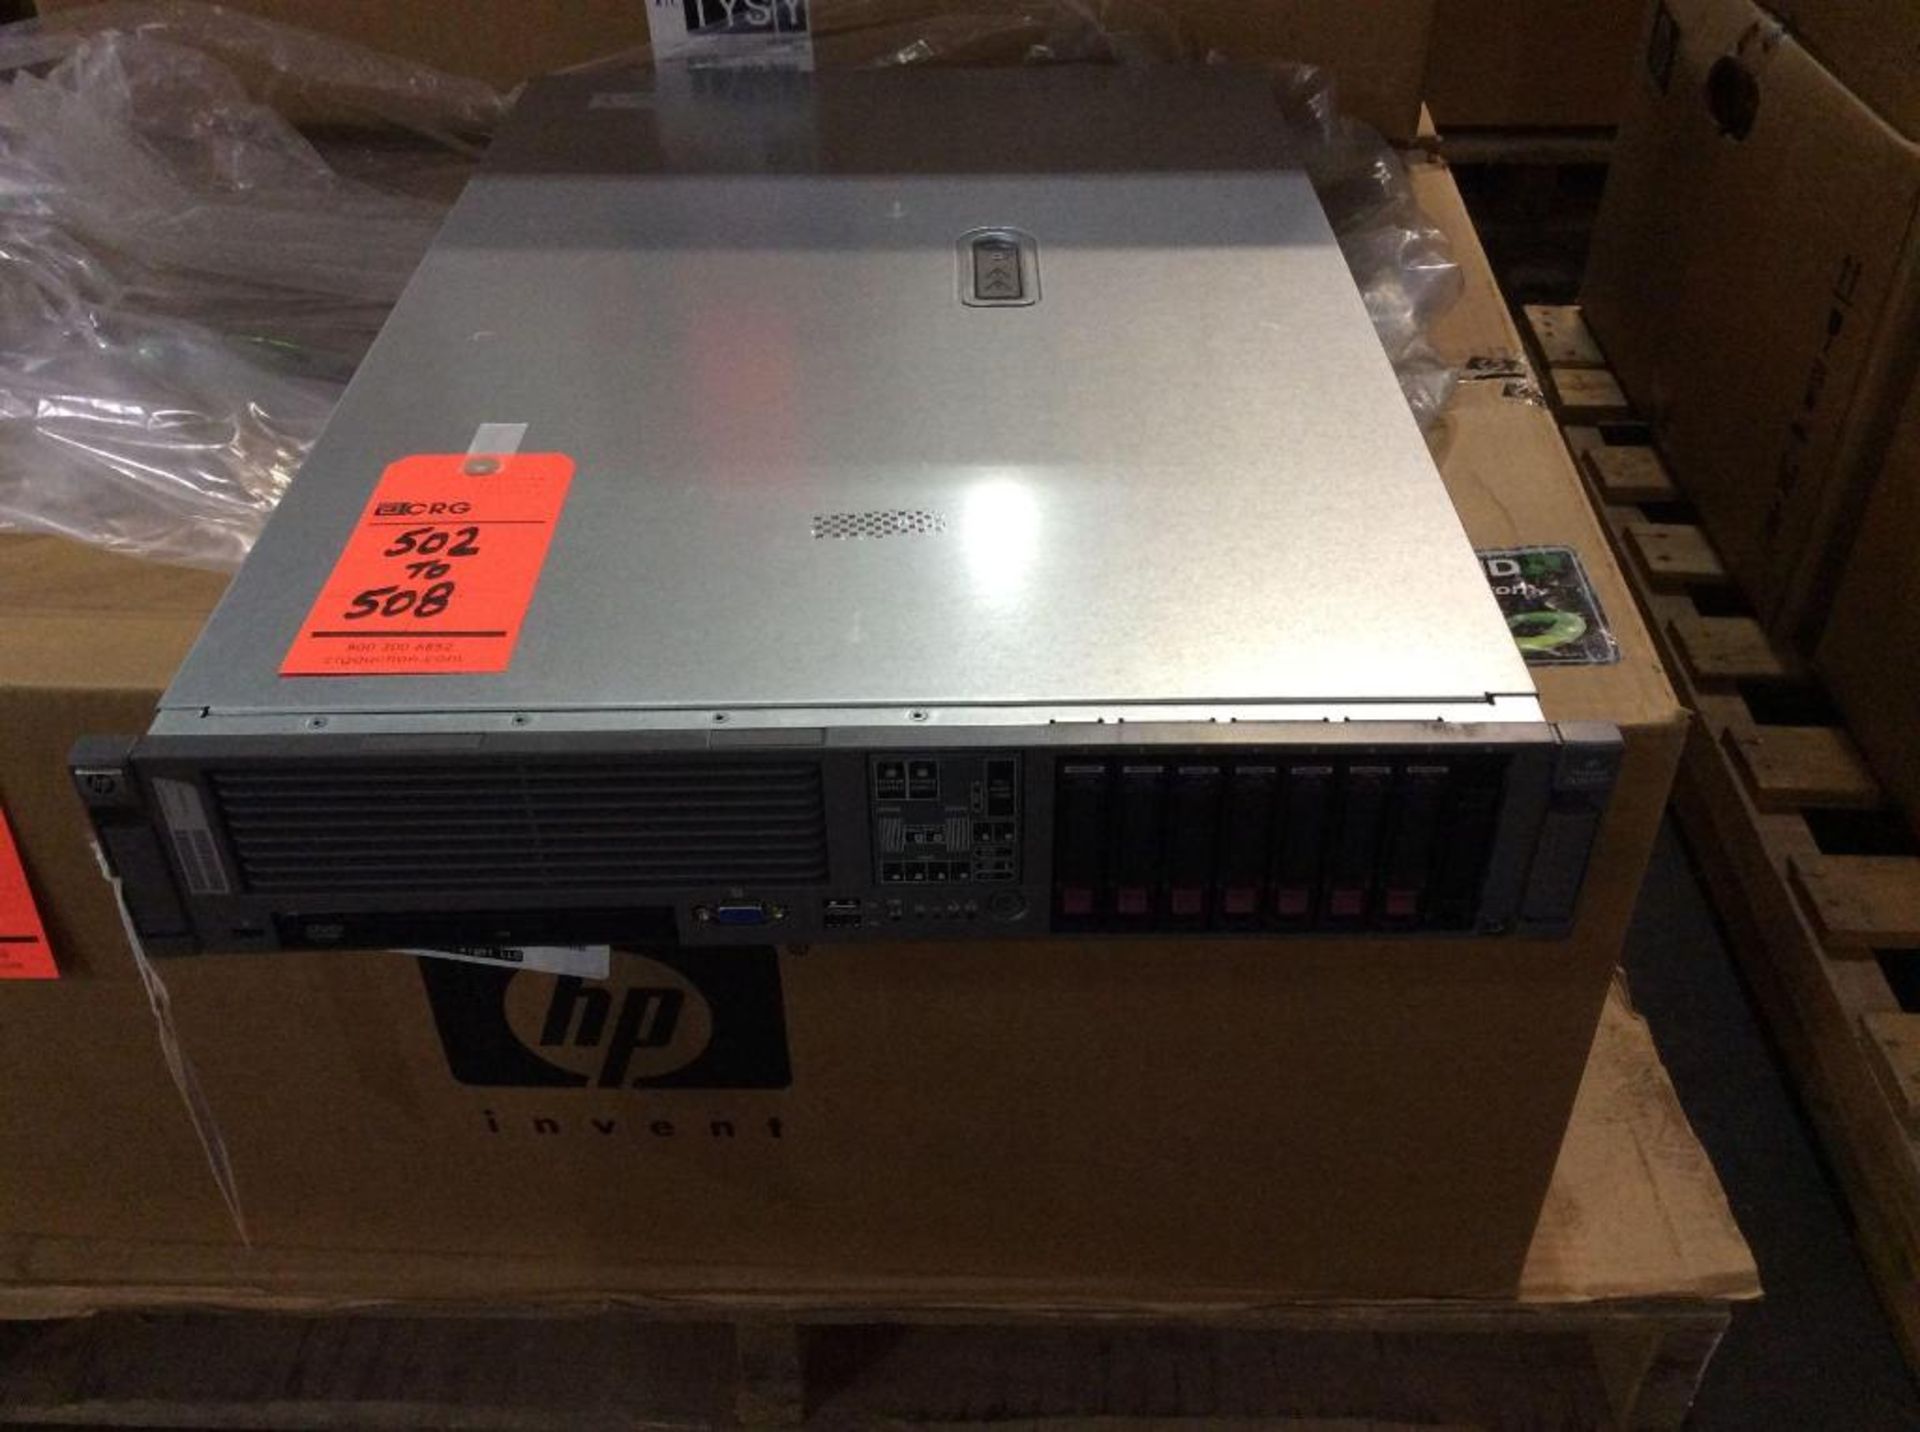 HP DL385R02 SP server with AMD OPTERON processor, NEW IN BOX